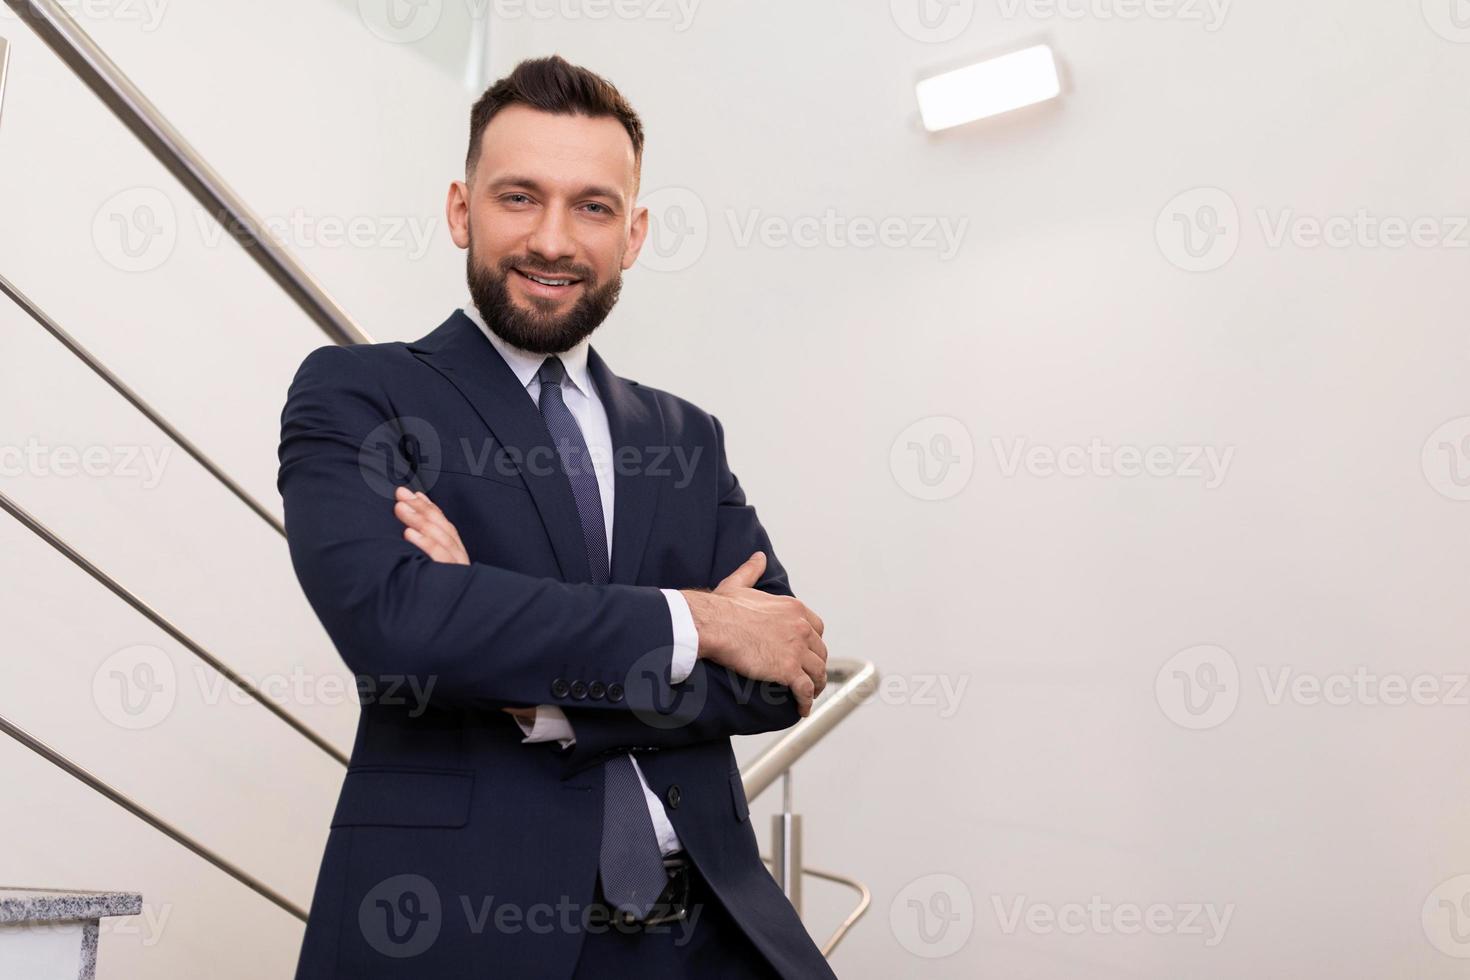 portrait of a middle-aged business man with crossed arms on his chest, top manager concept photo